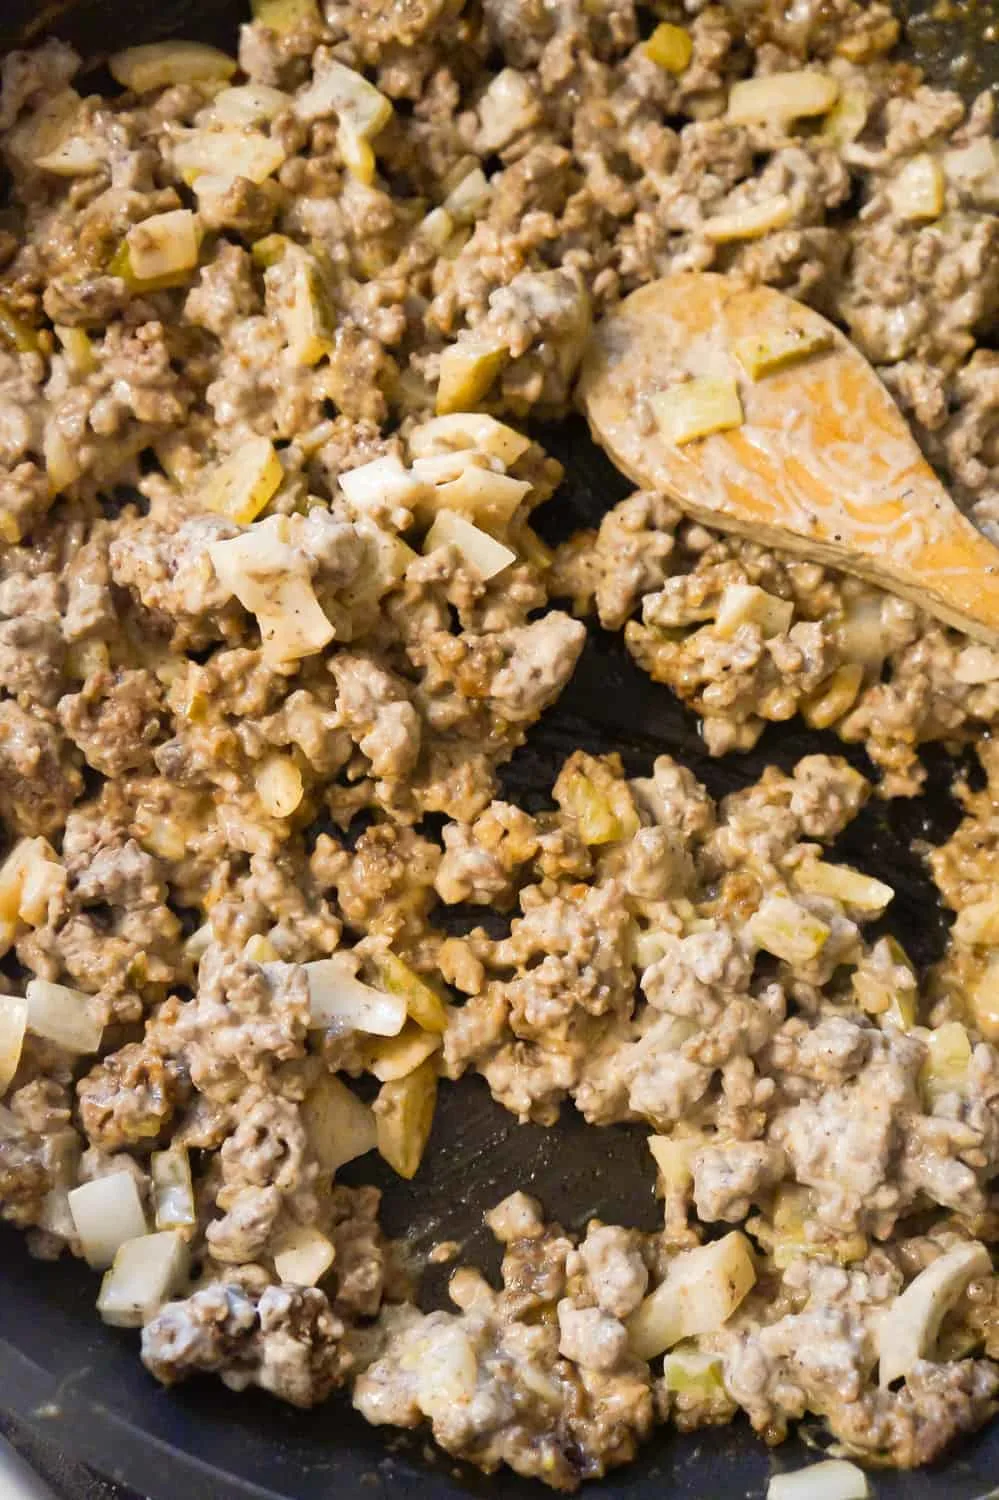 ground beef mixture in a frying pan